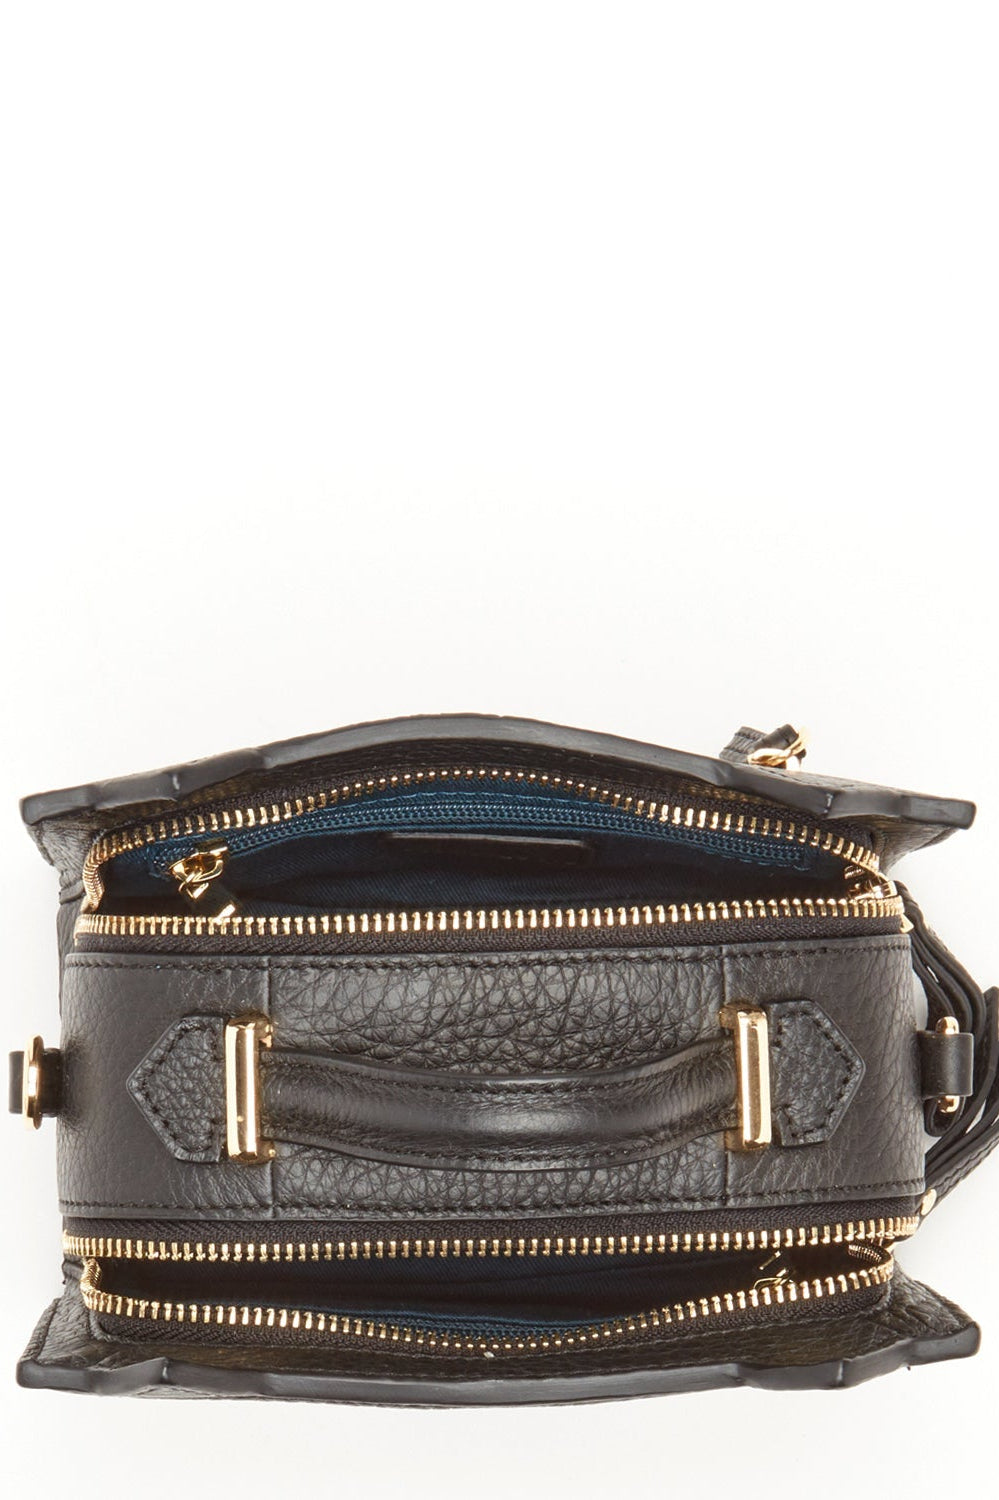 Black Genuine Leather Cat Crossbody Bag The Groovalution